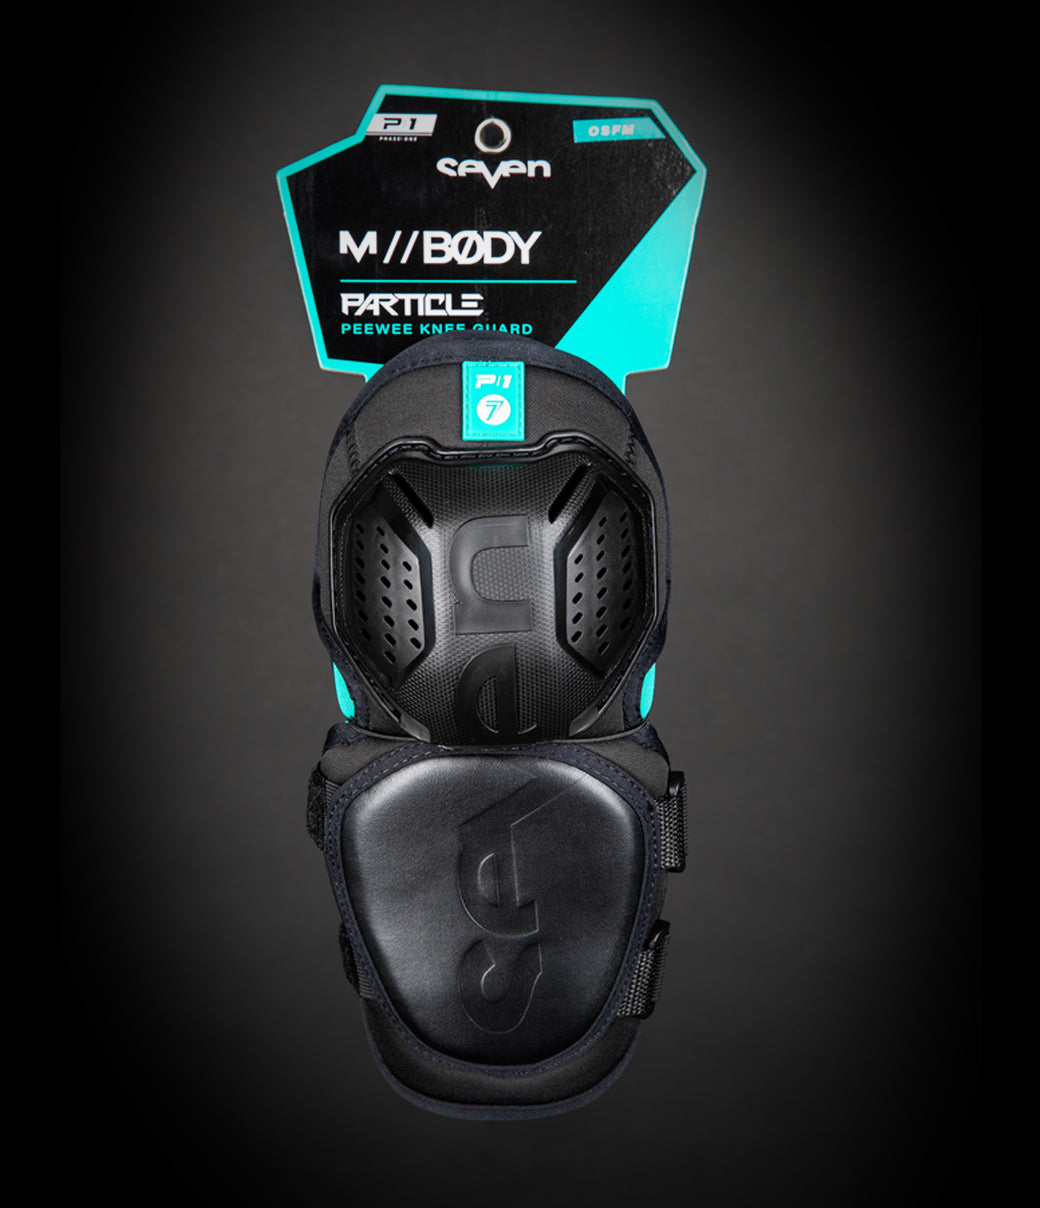 Particle Peewee Knee Guards